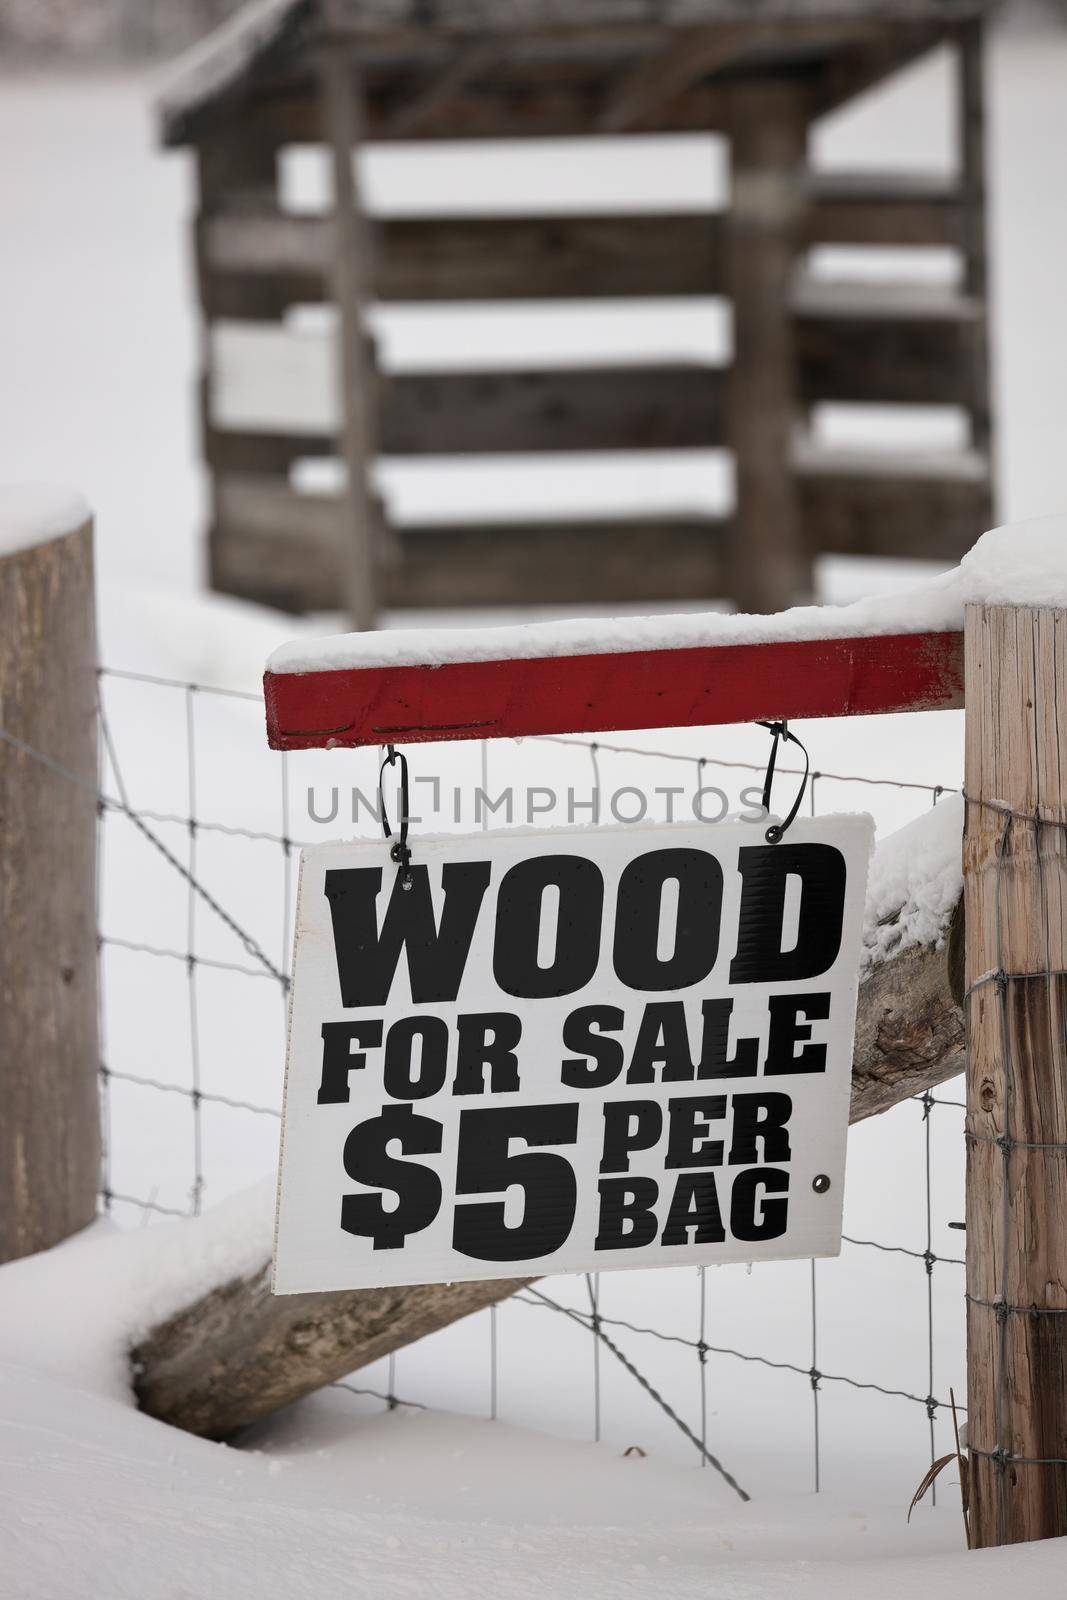 A Firewood for Sale Sign hanging on a fence in a rural setting. High quality photo